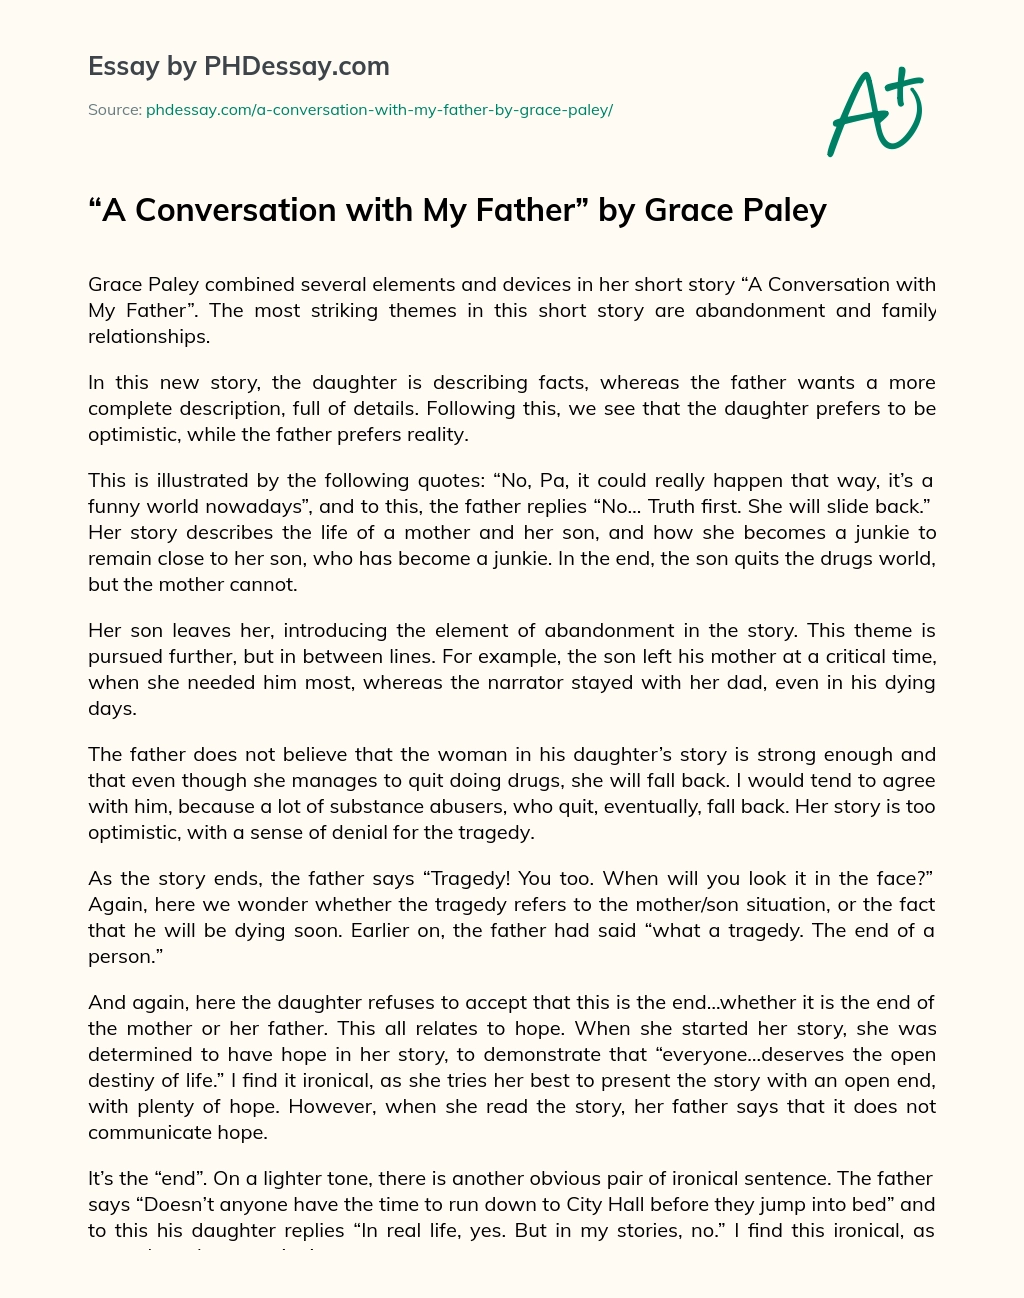 A Conversation with My Father by Grace Paley essay